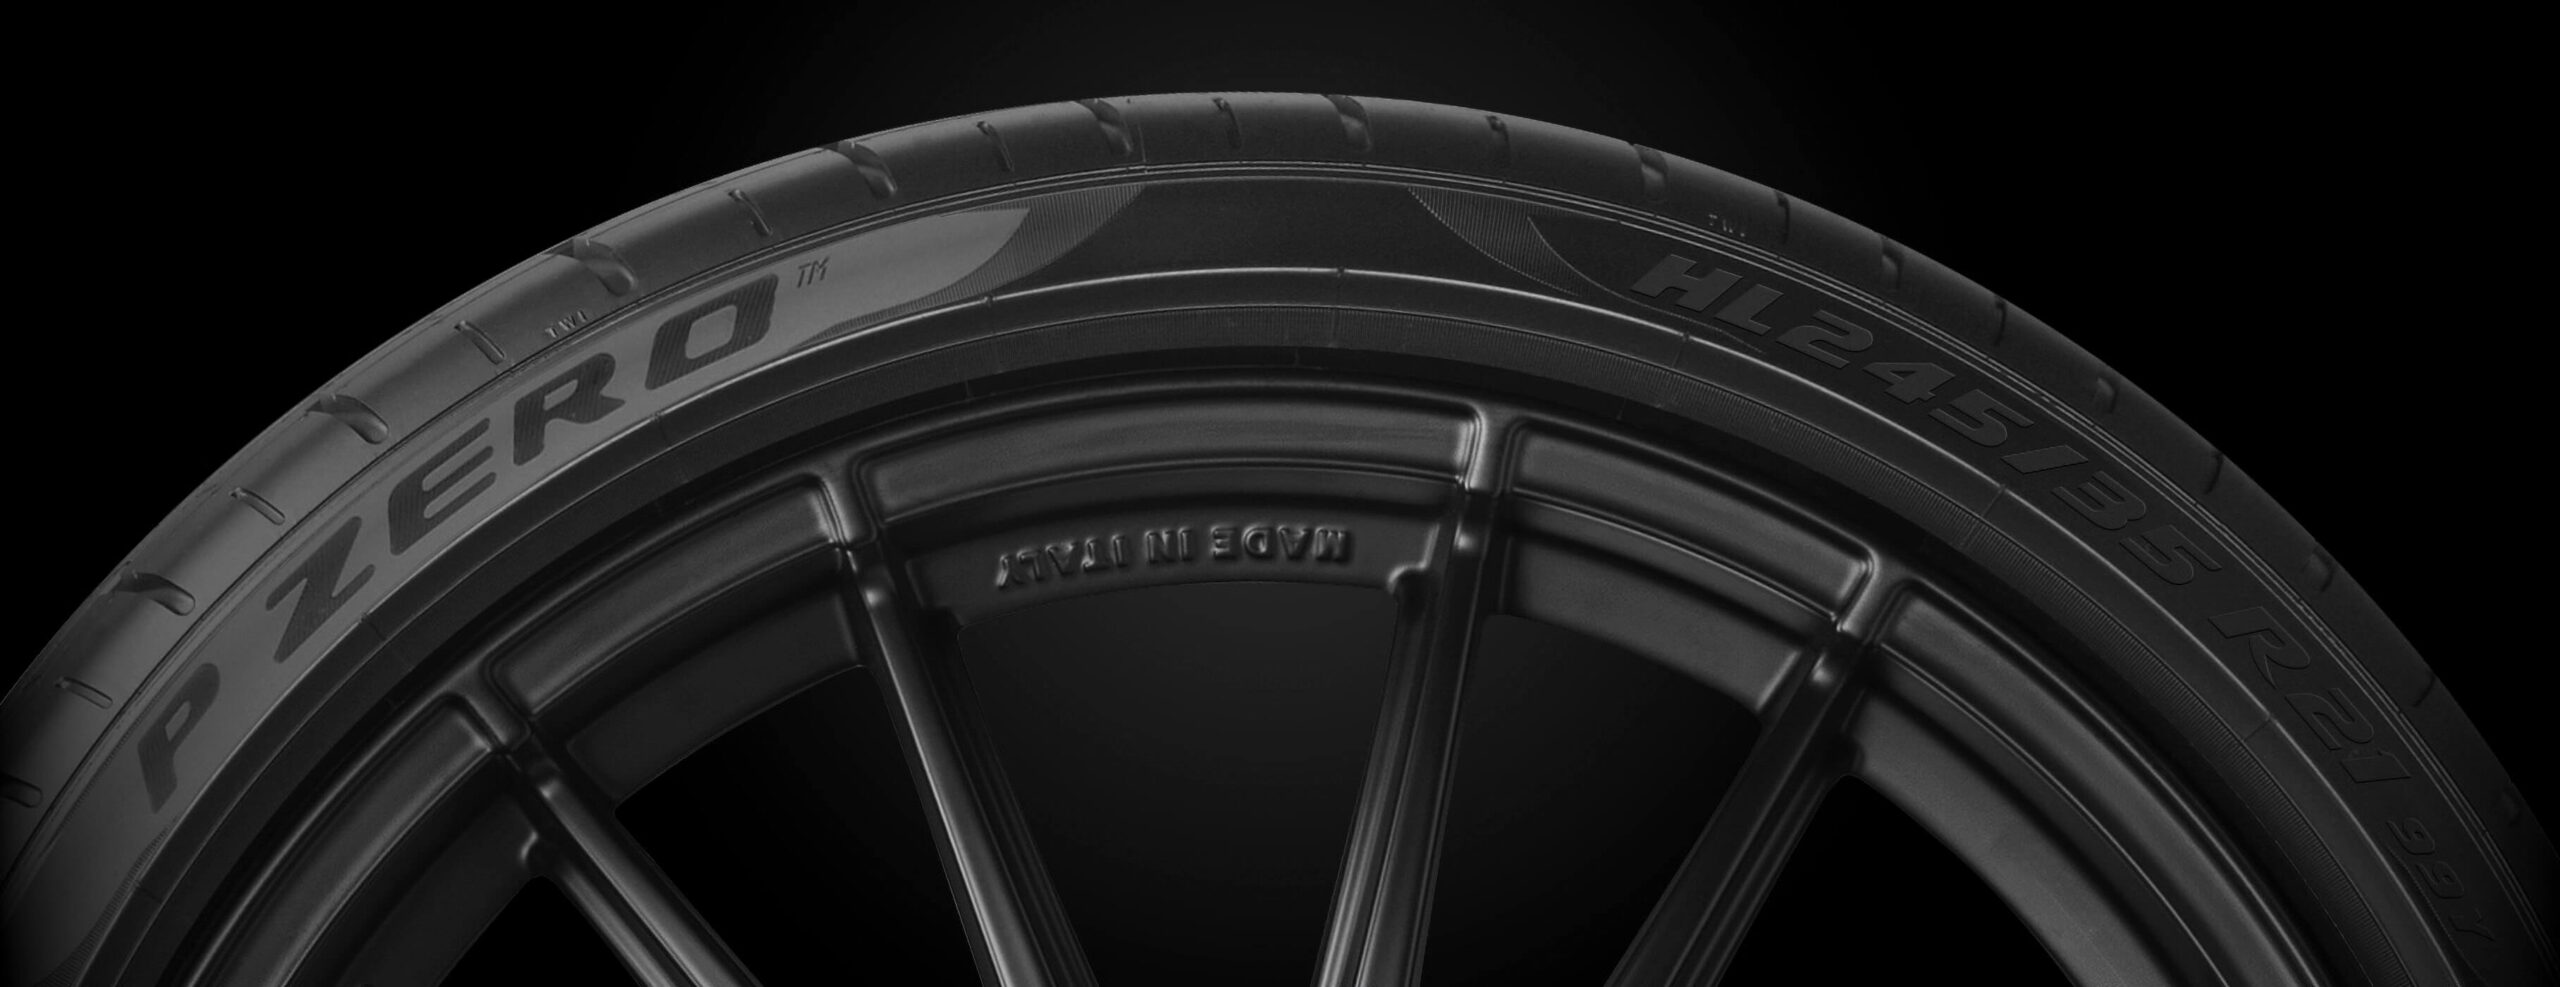 Pirelli launches High Load tire for EV's and Hybrids